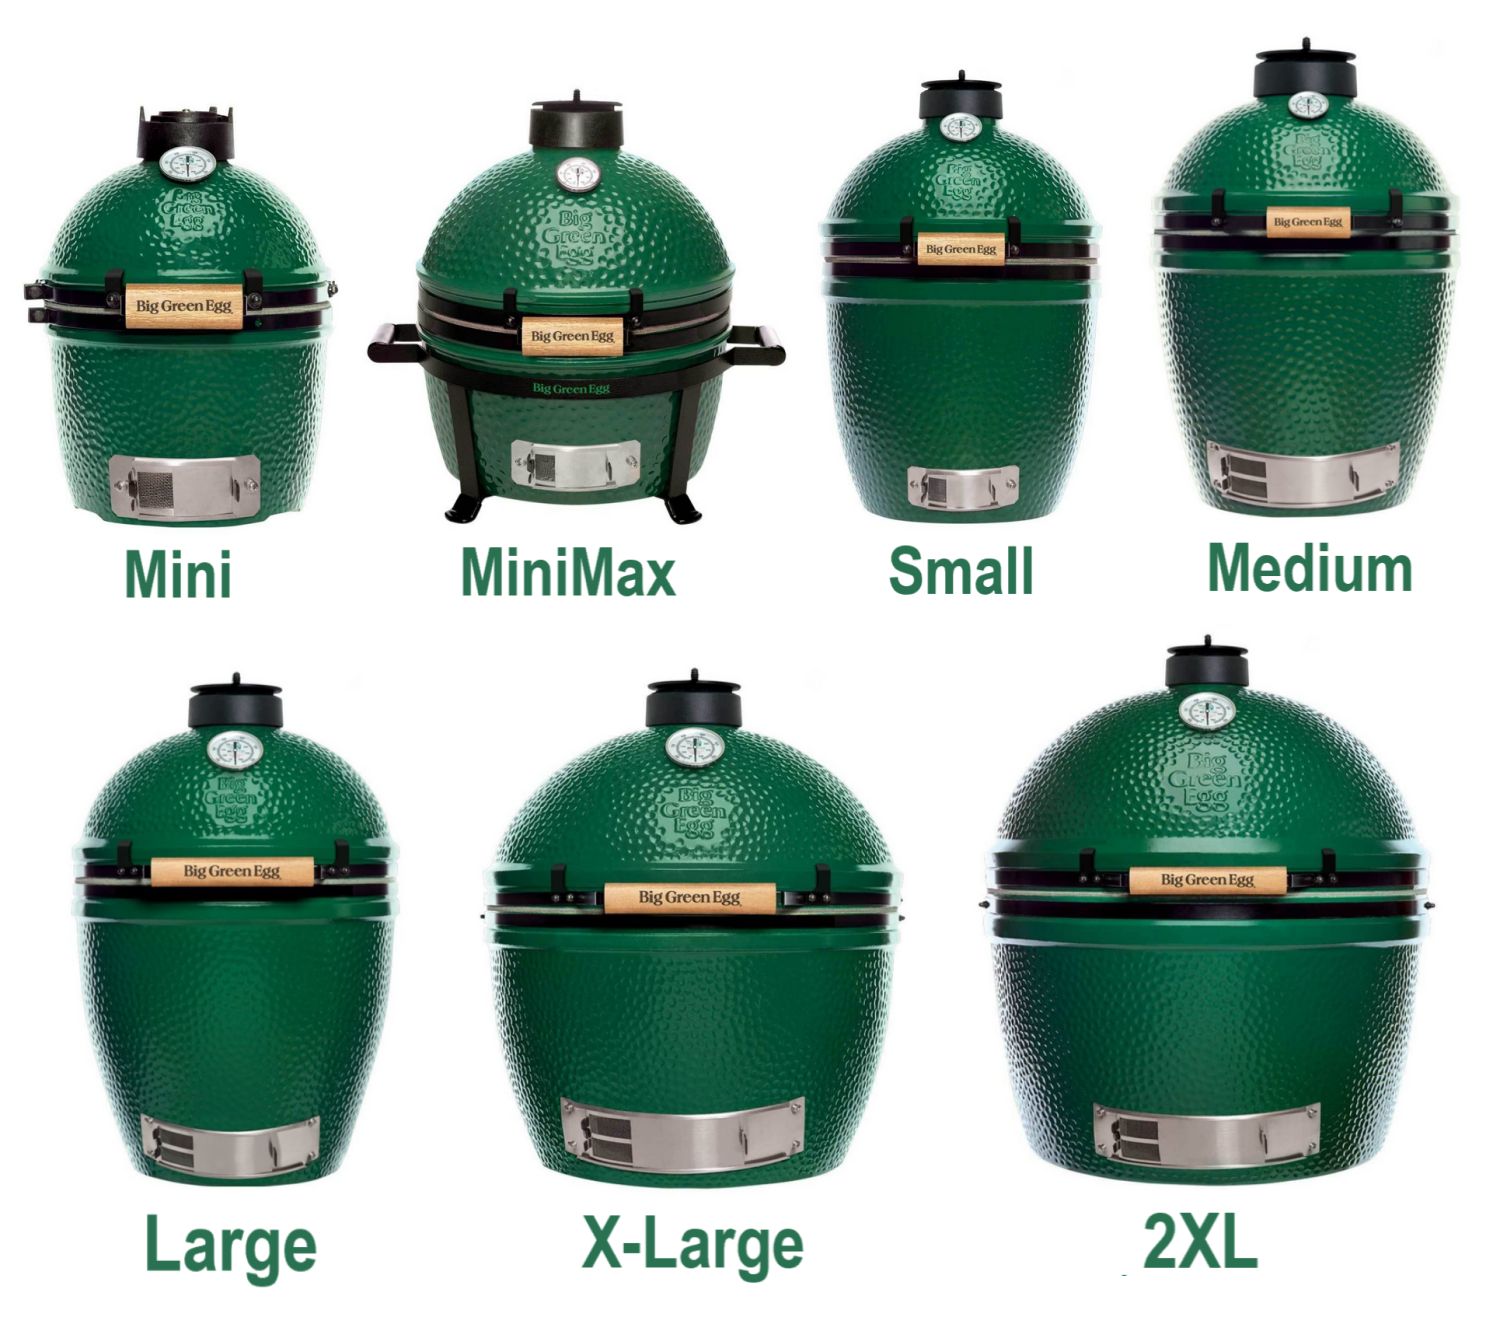 All 8 Big Green Egg models shown by size progression